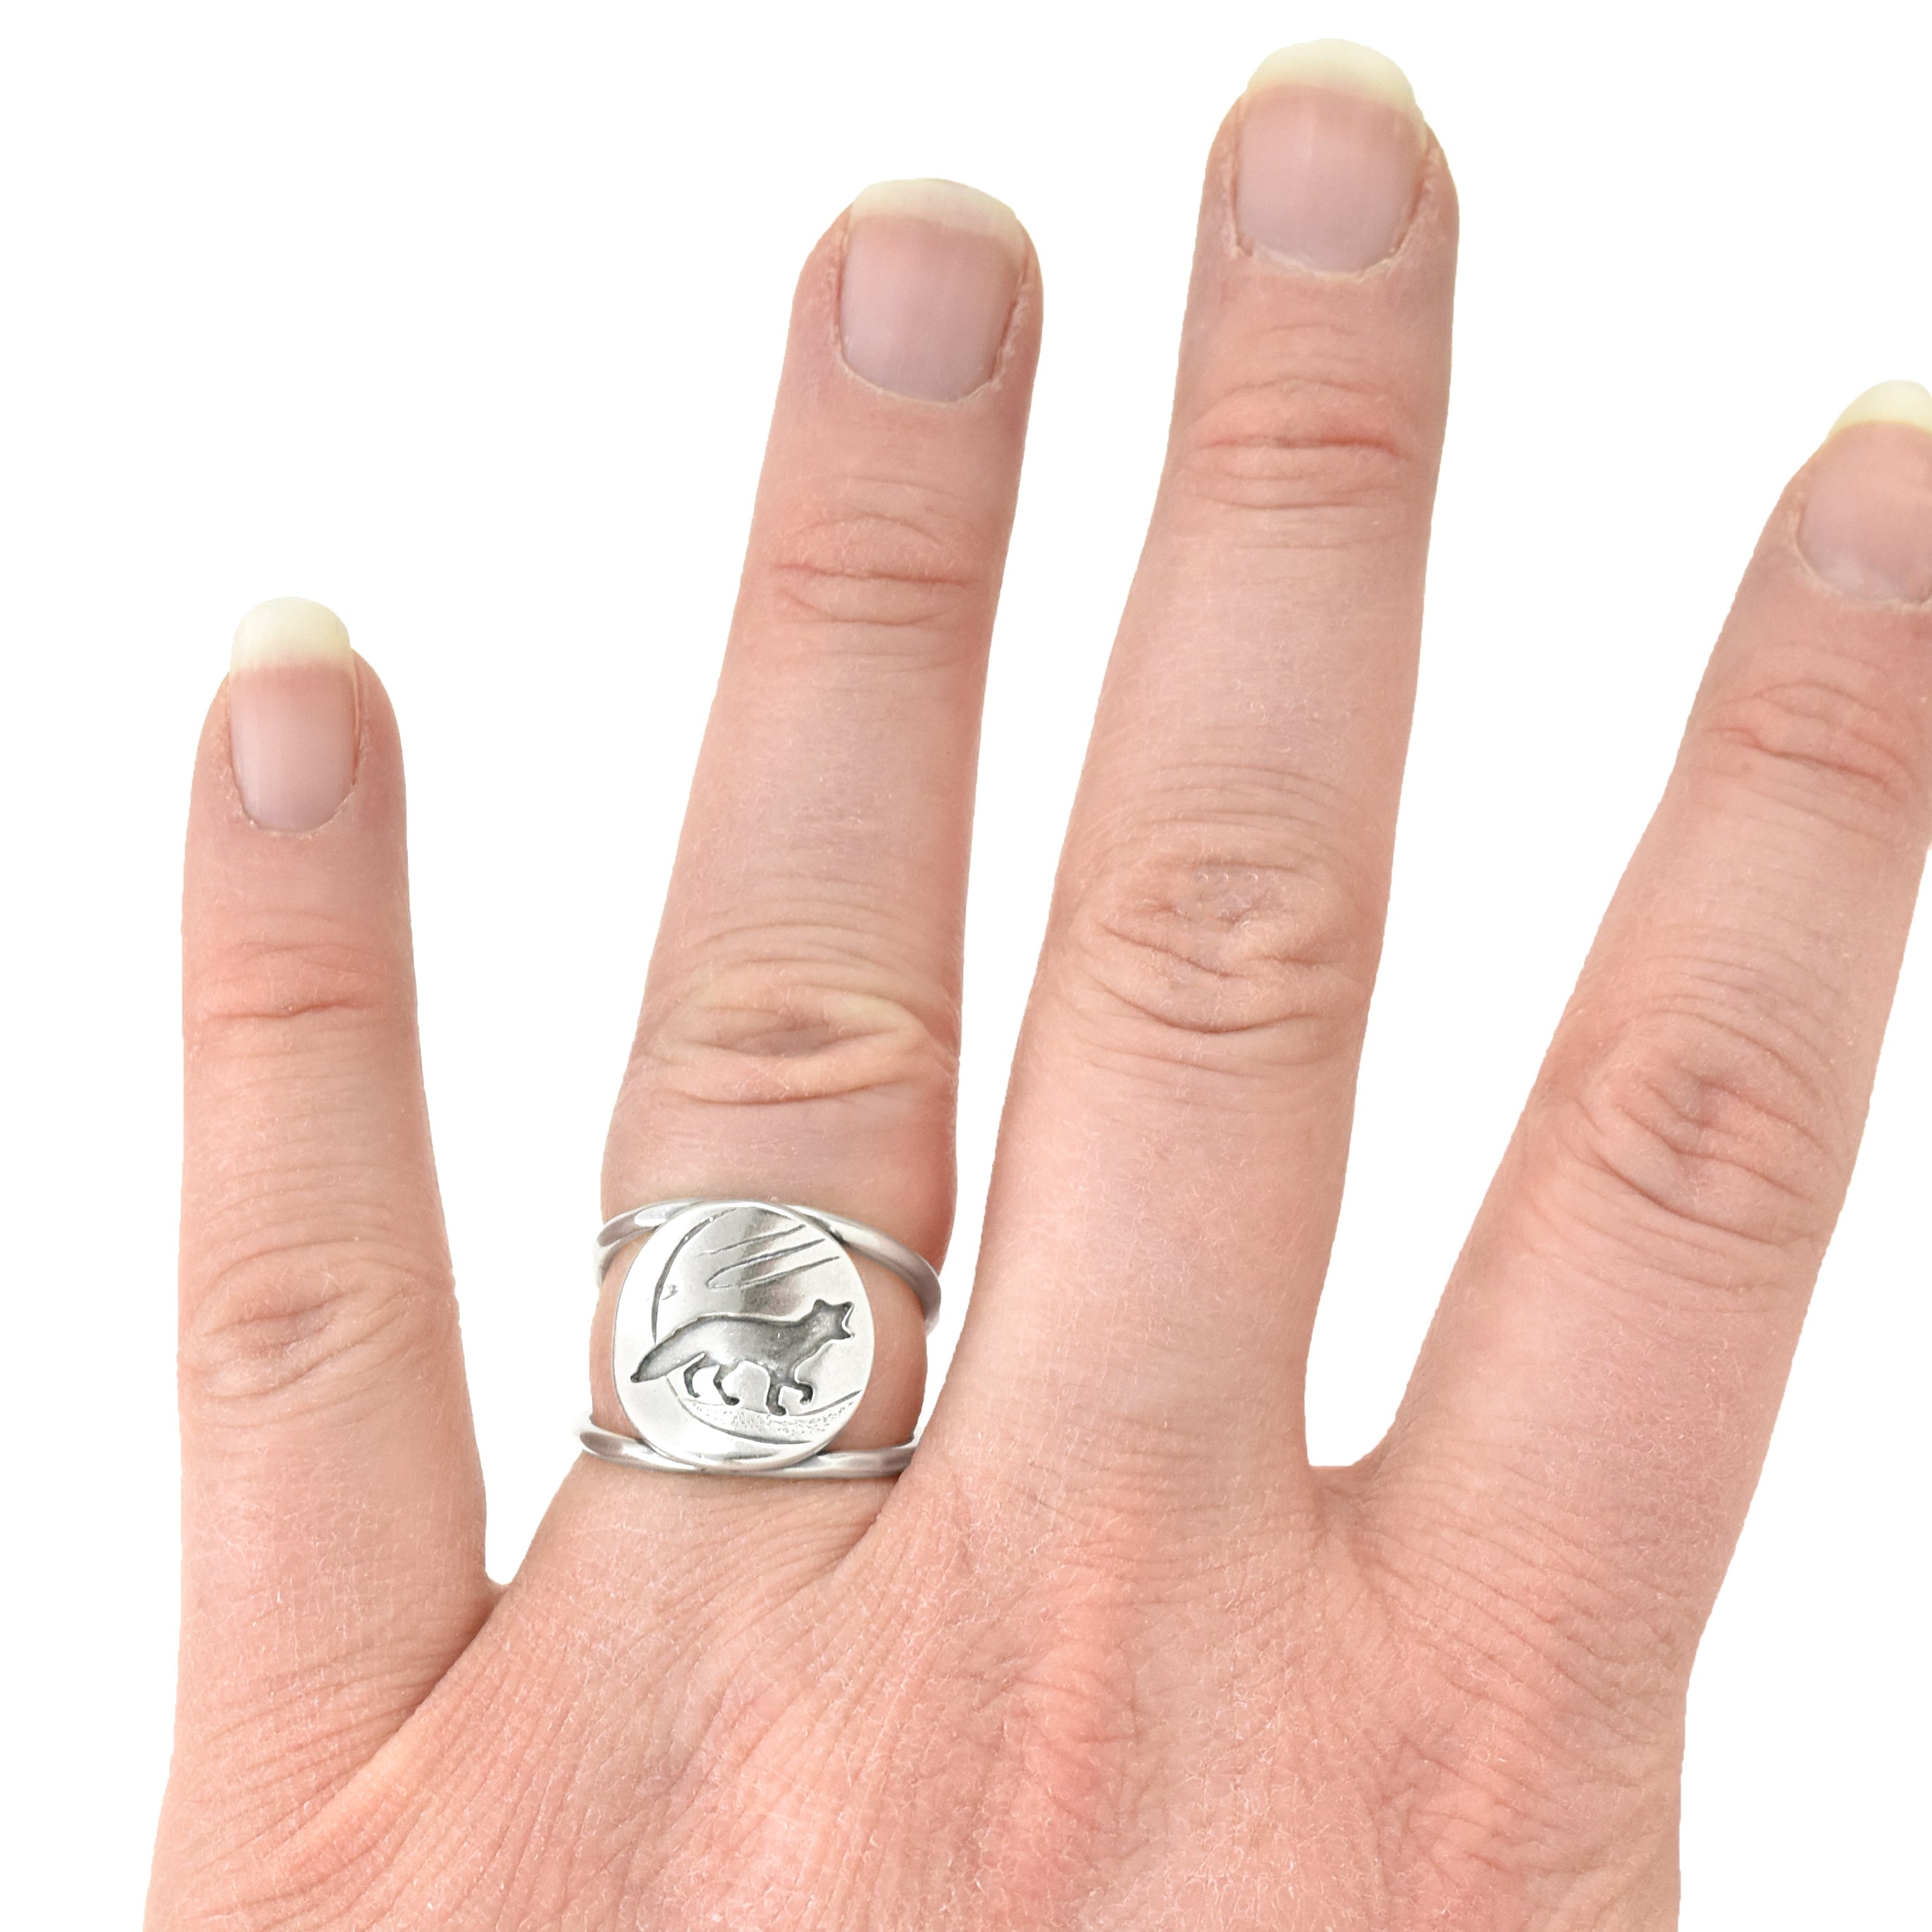 Silver Fox Ring - Ring Select Size 4 6984 - handmade by Beth Millner Jewelry